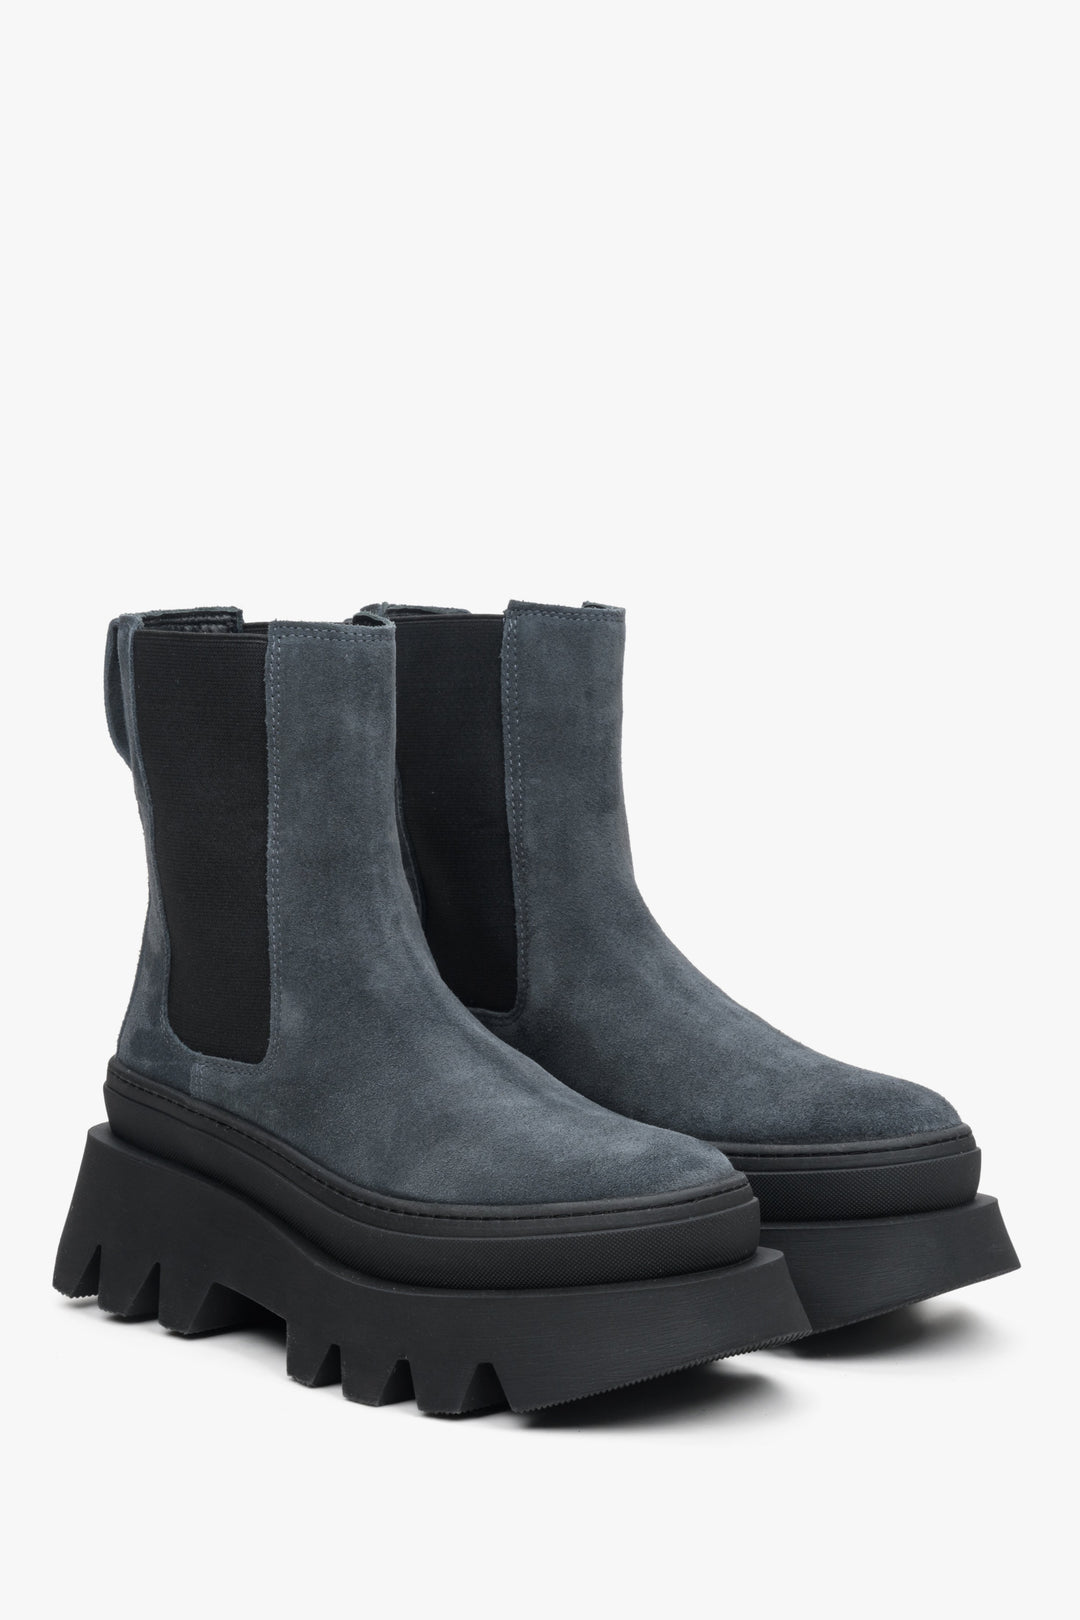 Women's grey leather chelsea boots on a platform by Estro - close-up on the toe and side seam of the shoes.